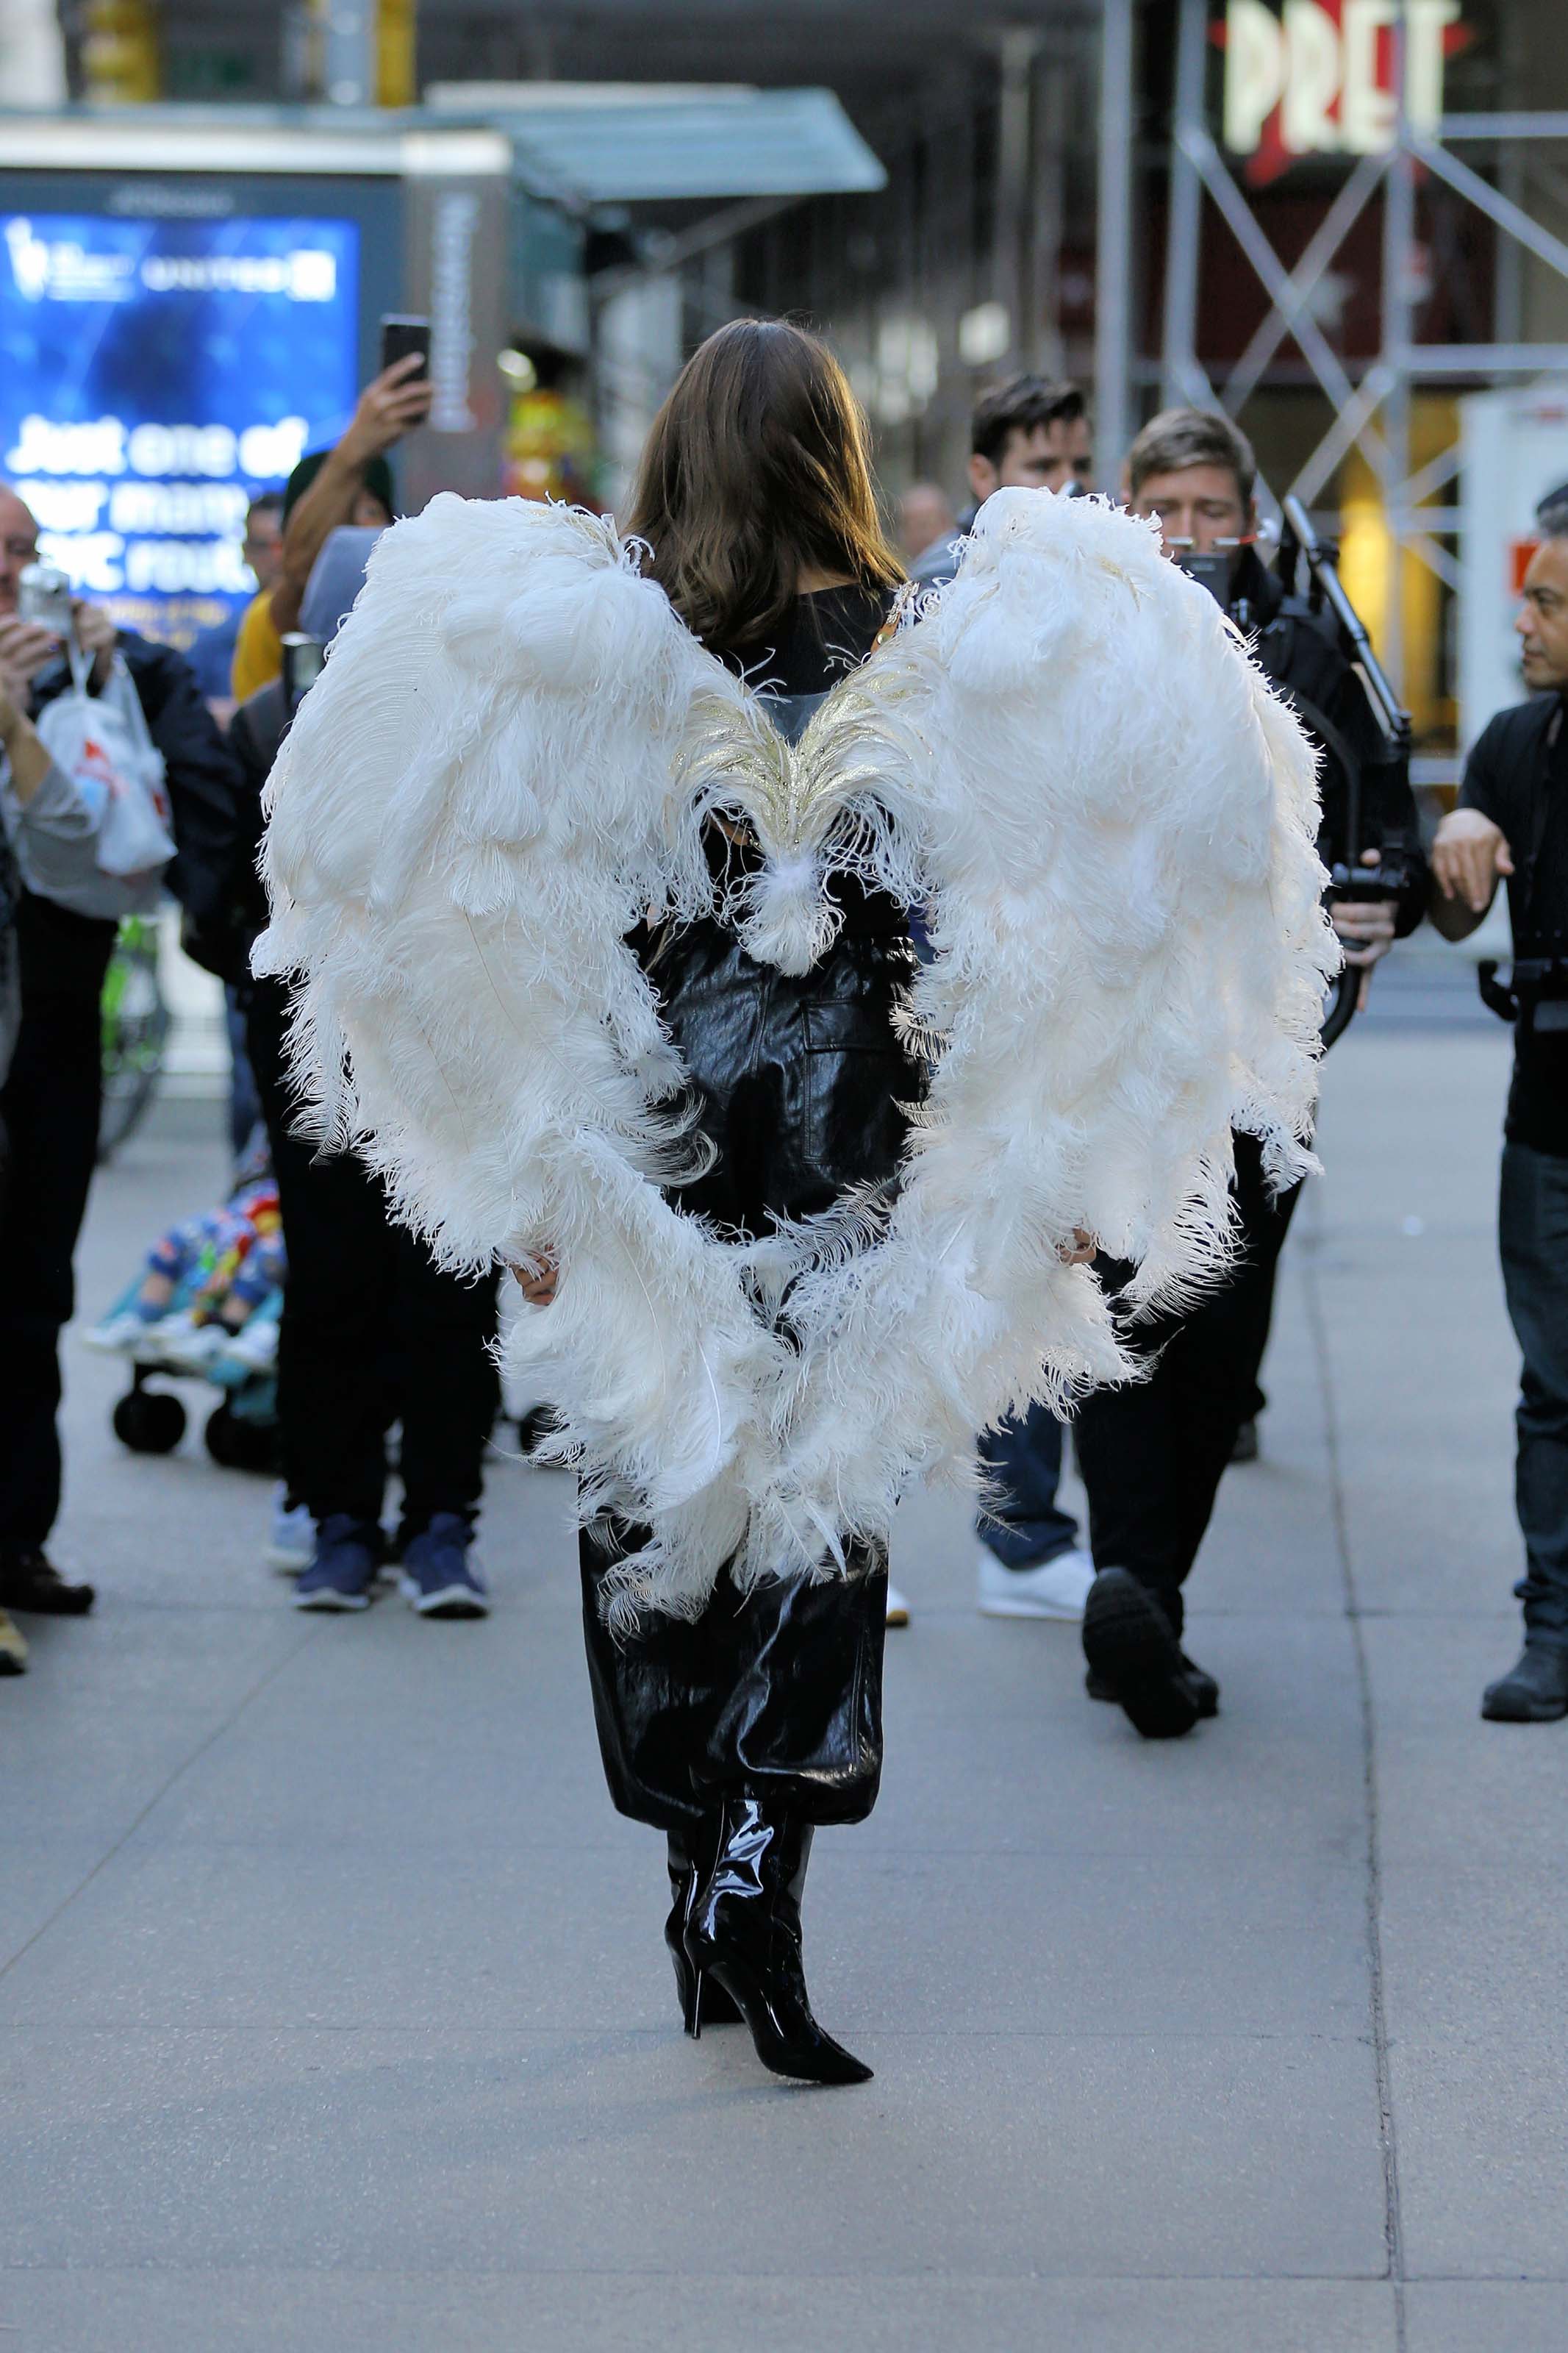 Taylor Hill films a small promo event in NYC showcasing her Angel Wings